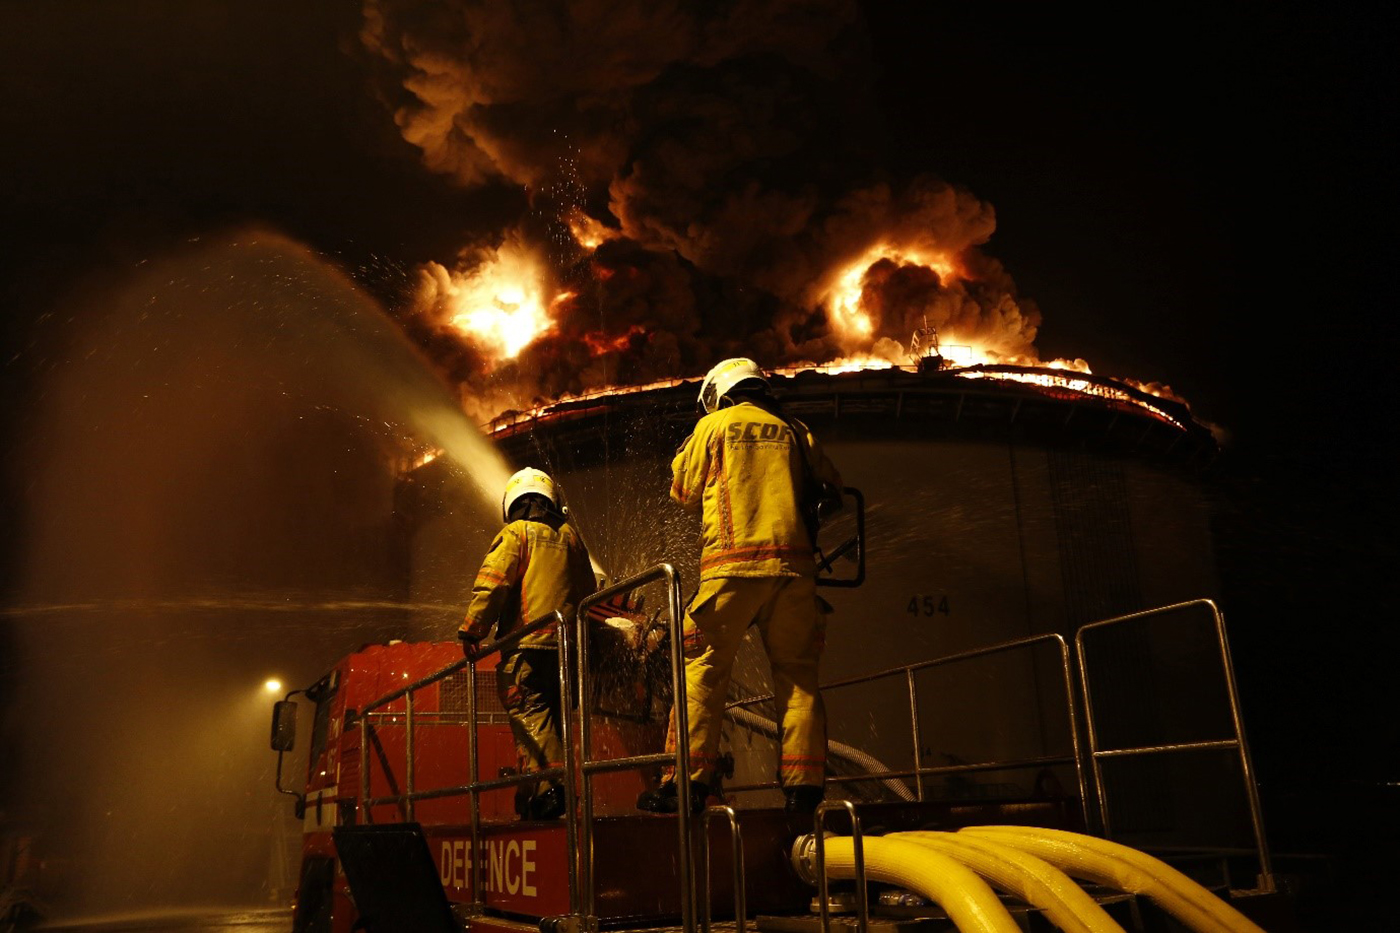 SCDF personnel fighting the oil storage tank fire at Pulau Busing.